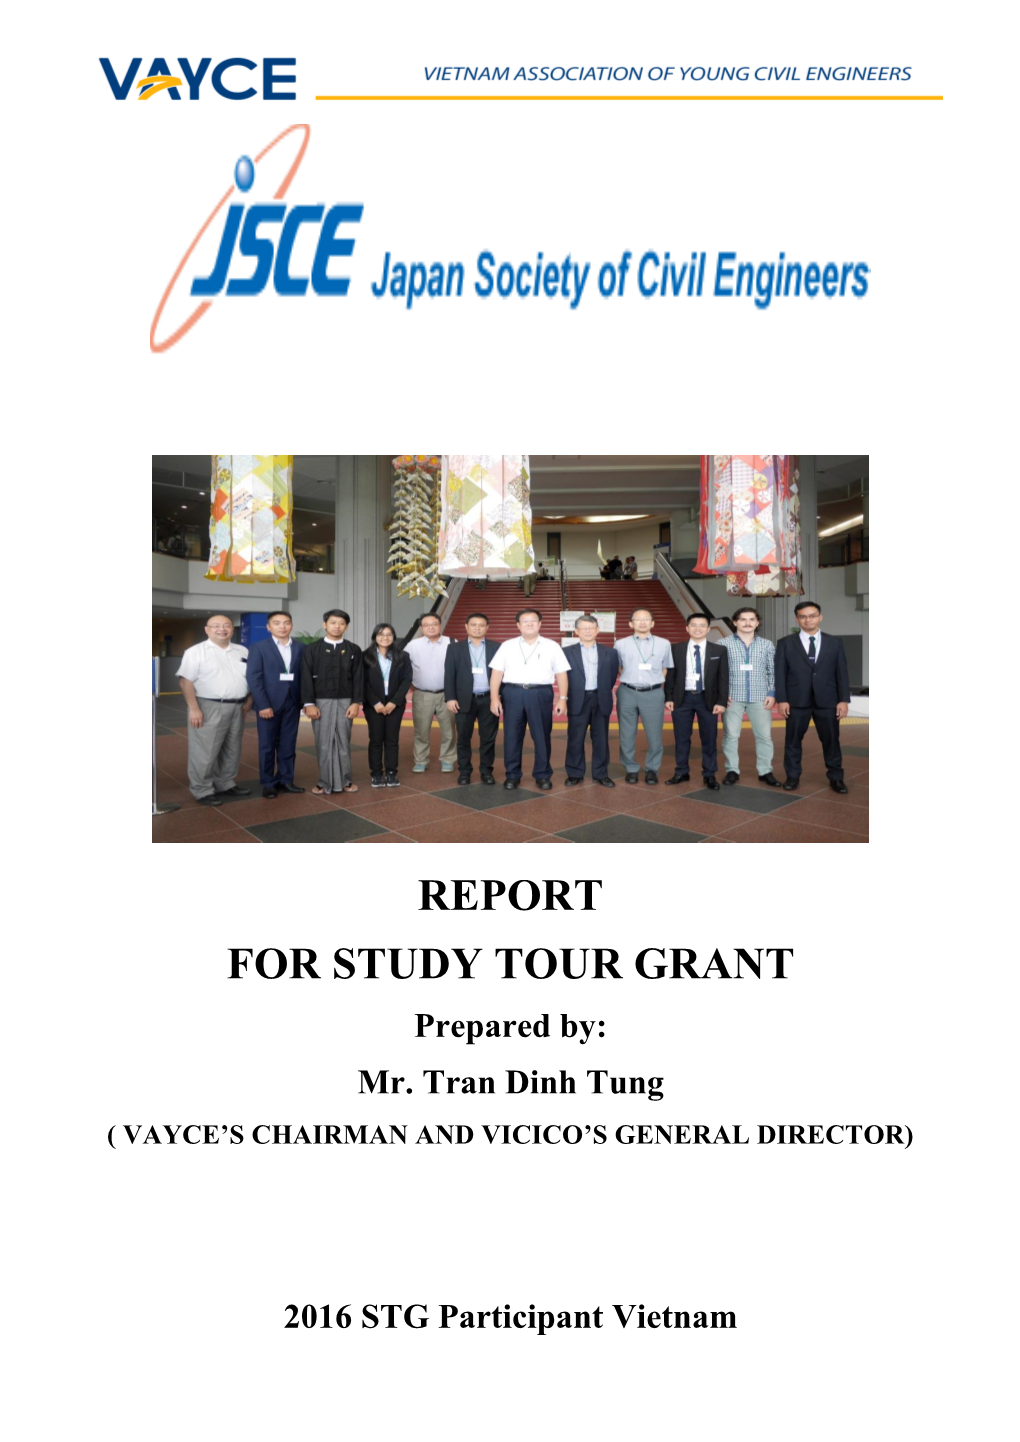 REPORT for STUDY TOUR GRANT Prepared By: Mr